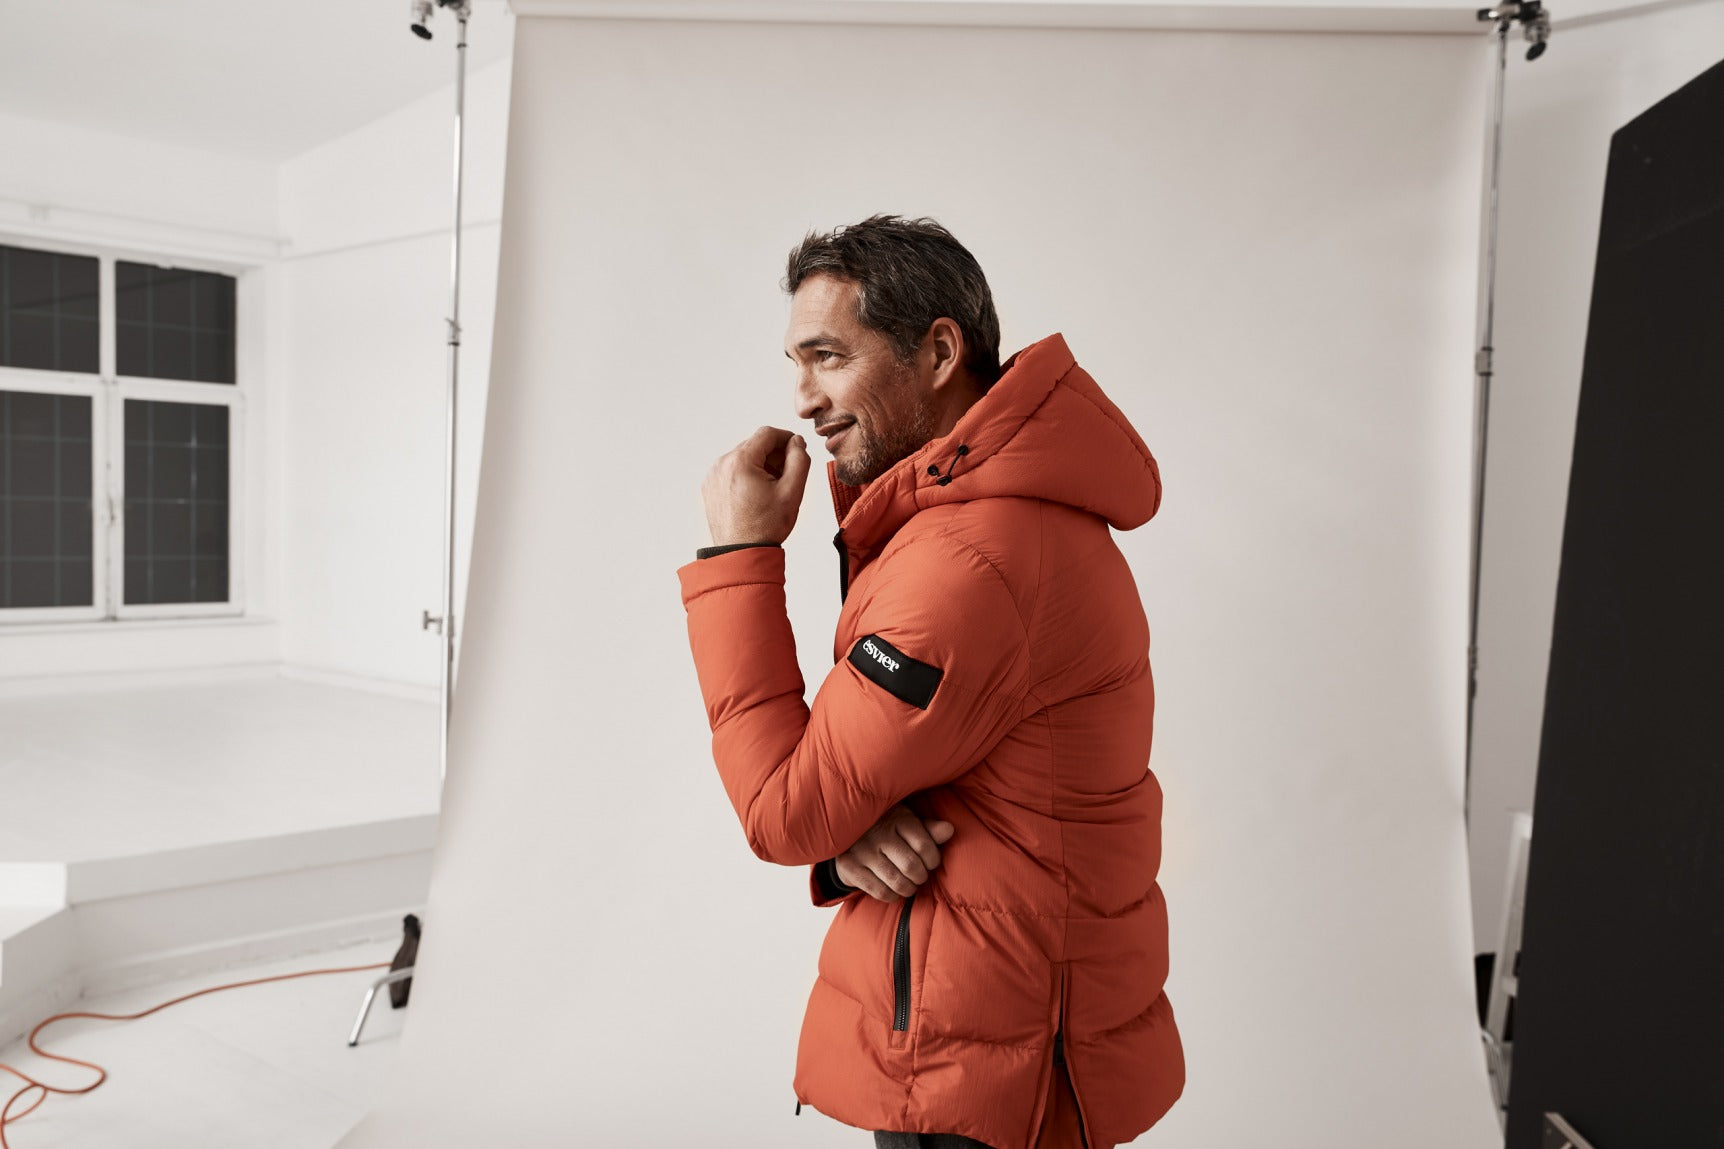 Animal free S4 SHOWTIME modern winter jacket with detachable hood. (RED)